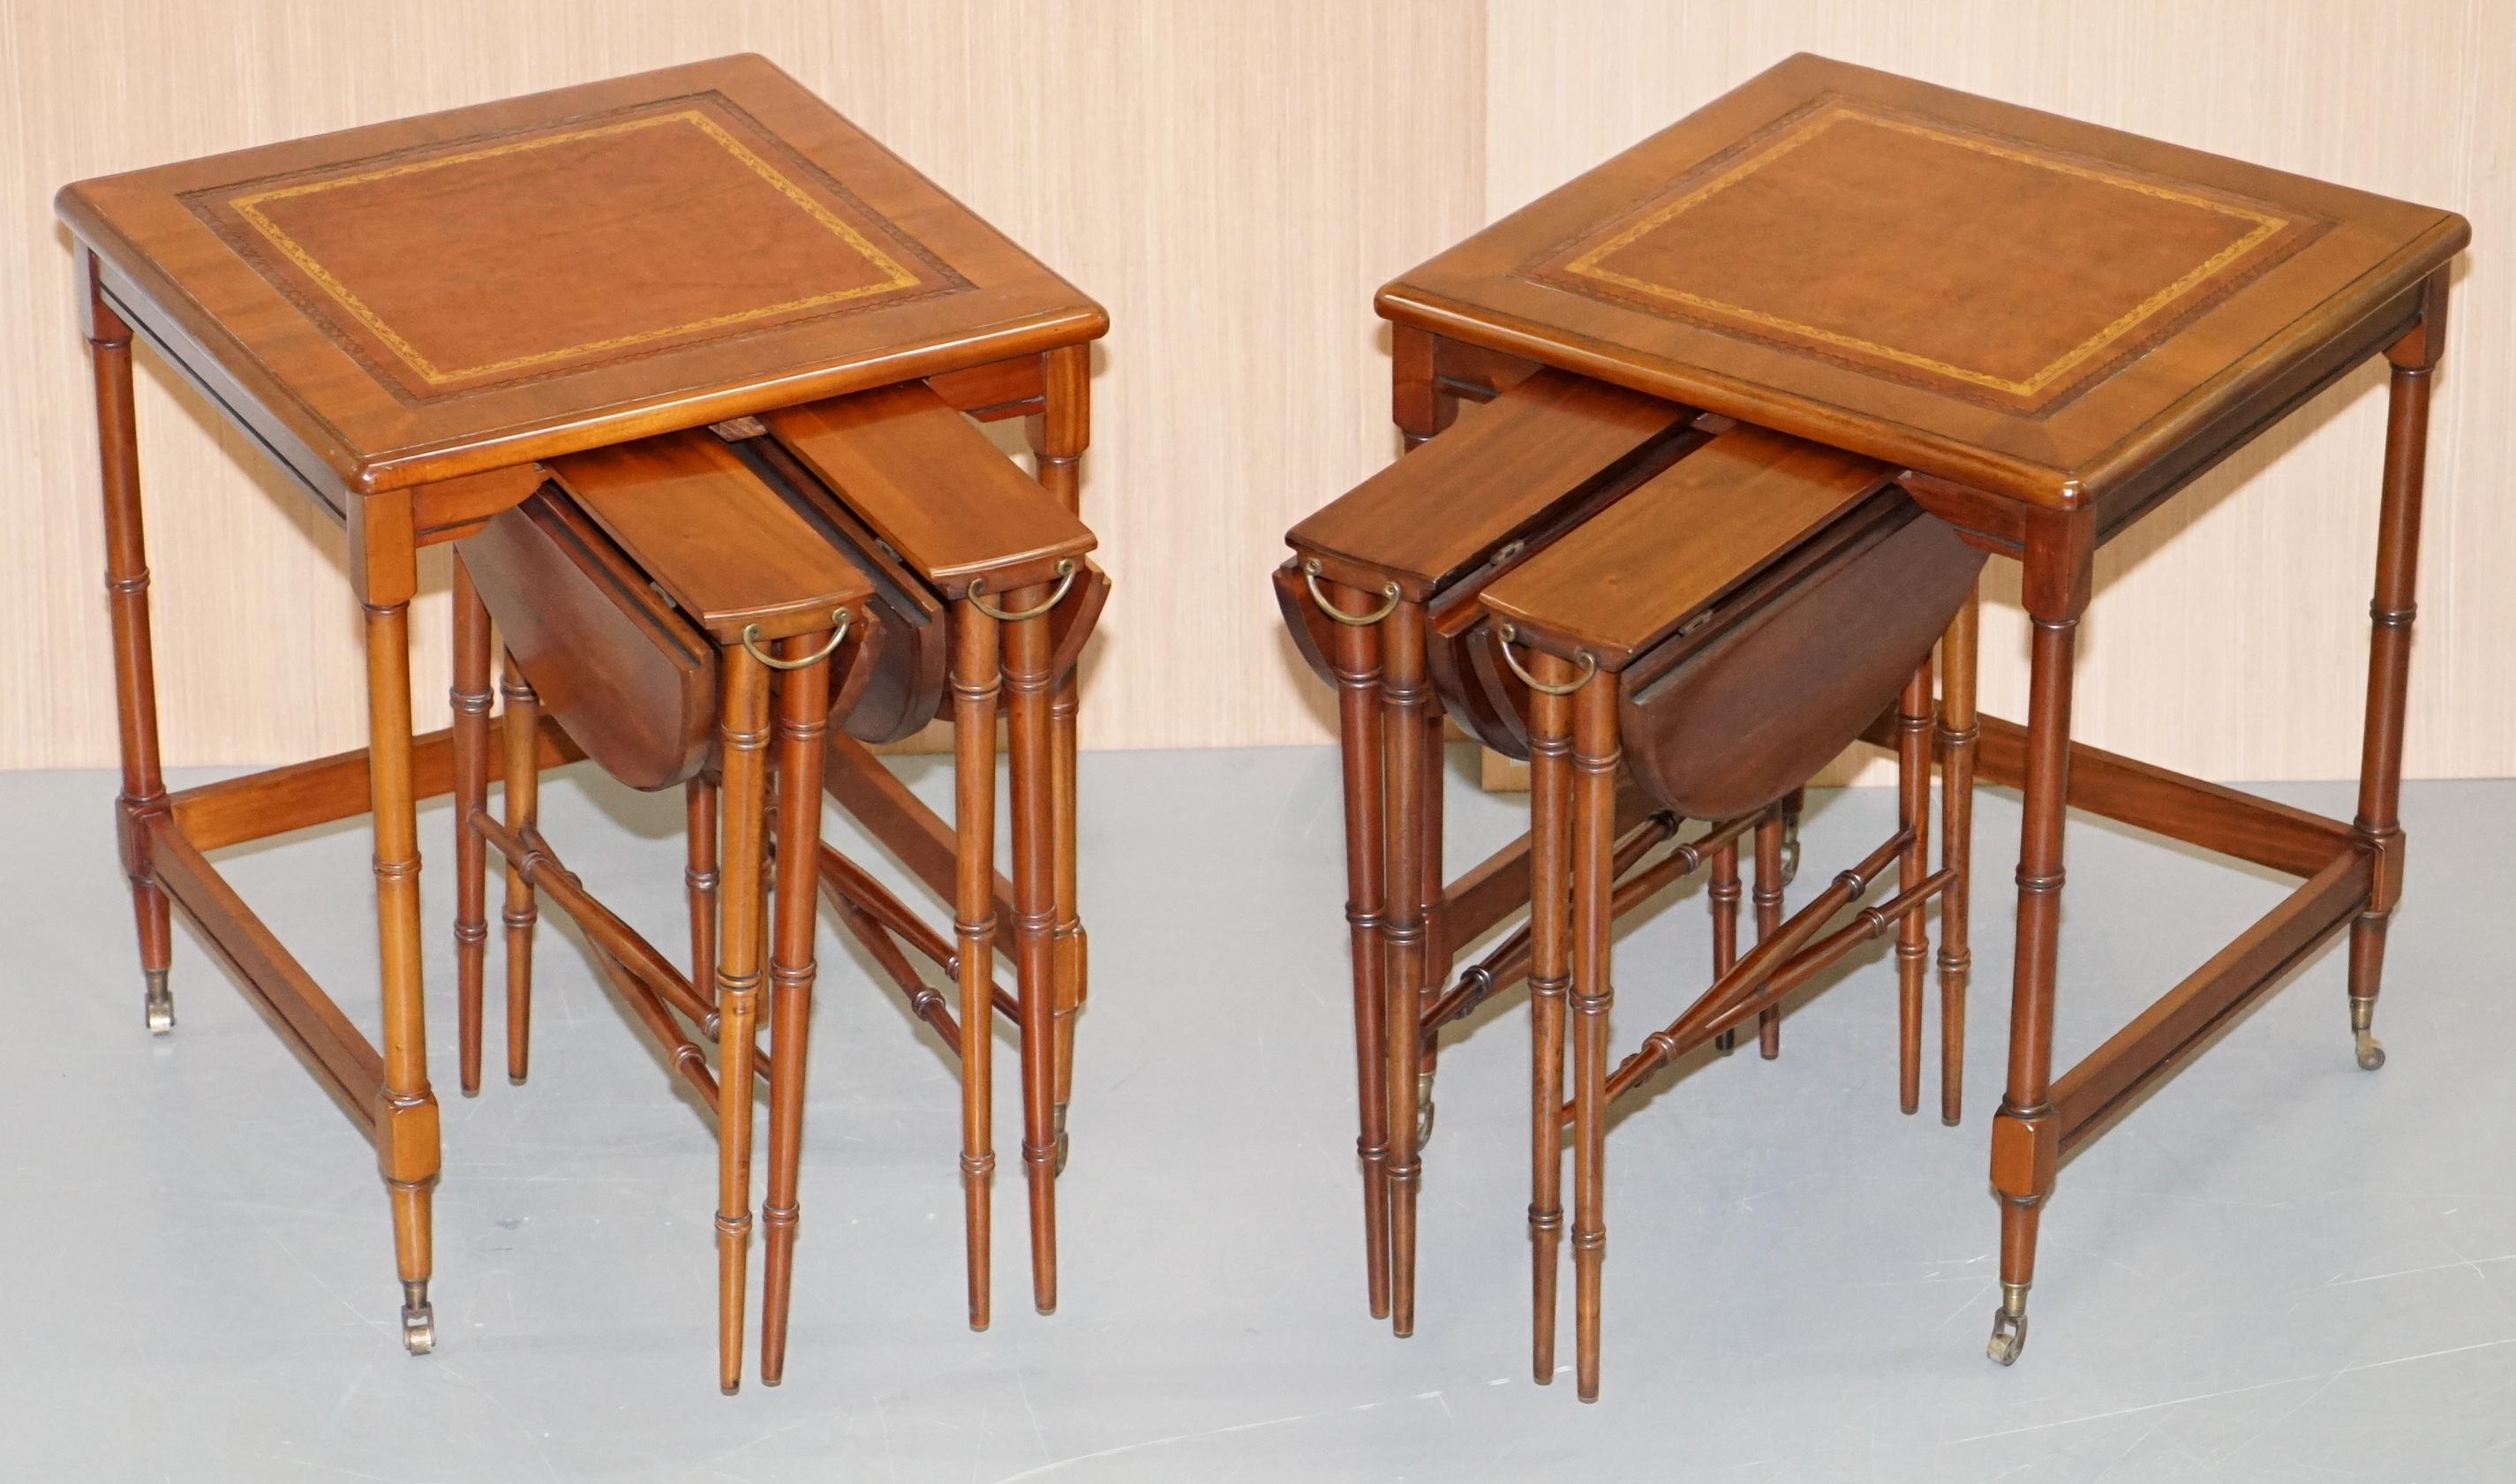 Rare Pair of Military Campaign Side Tables with Two Folded Round Tables Nested 5